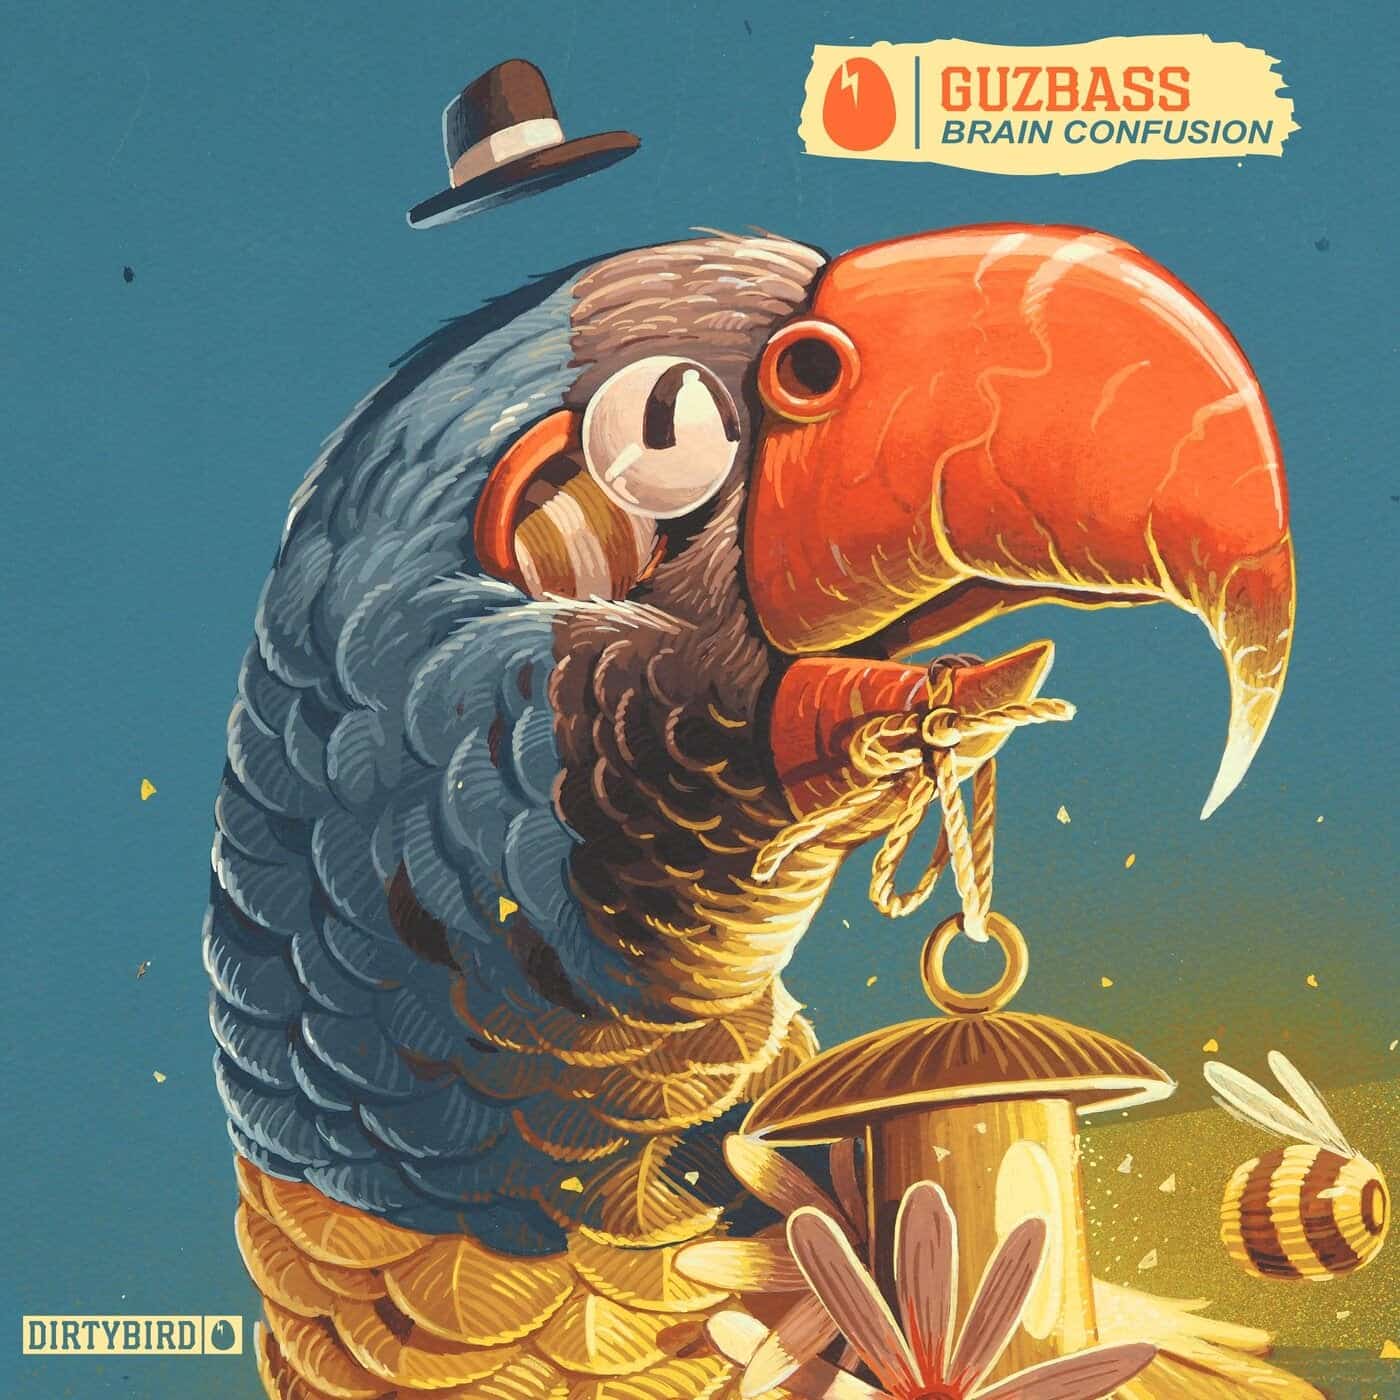 Download GuzBass - Brain Confusion on Electrobuzz